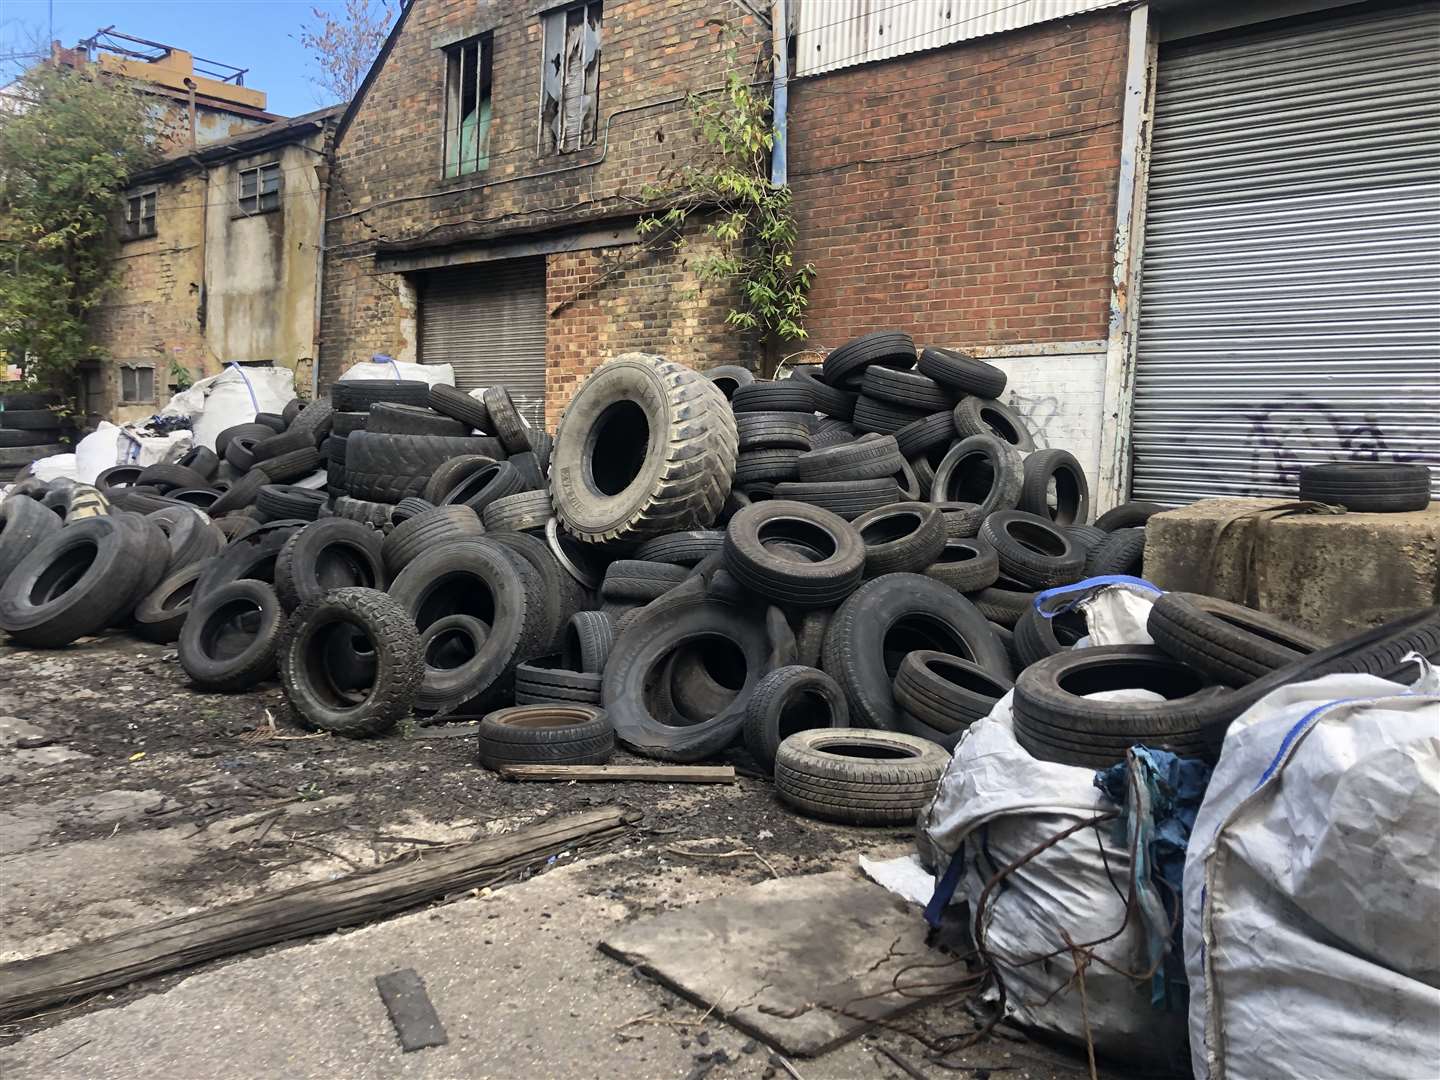 A mountain of tyres has been created further along the path